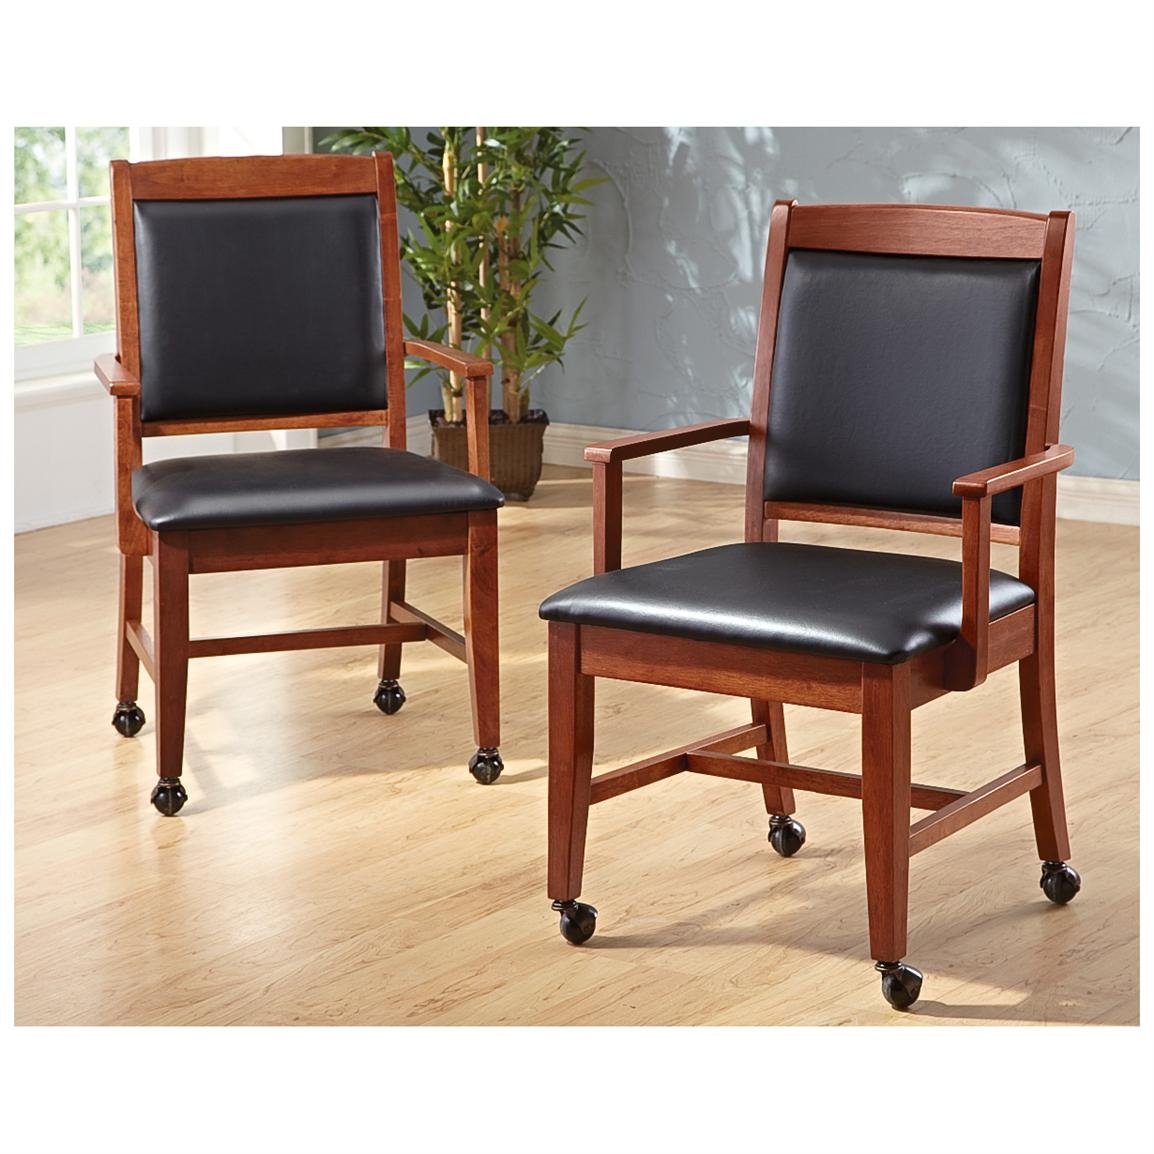 Dining Chairs With Casters Visualhunt, Leather Kitchen Chairs With Casters